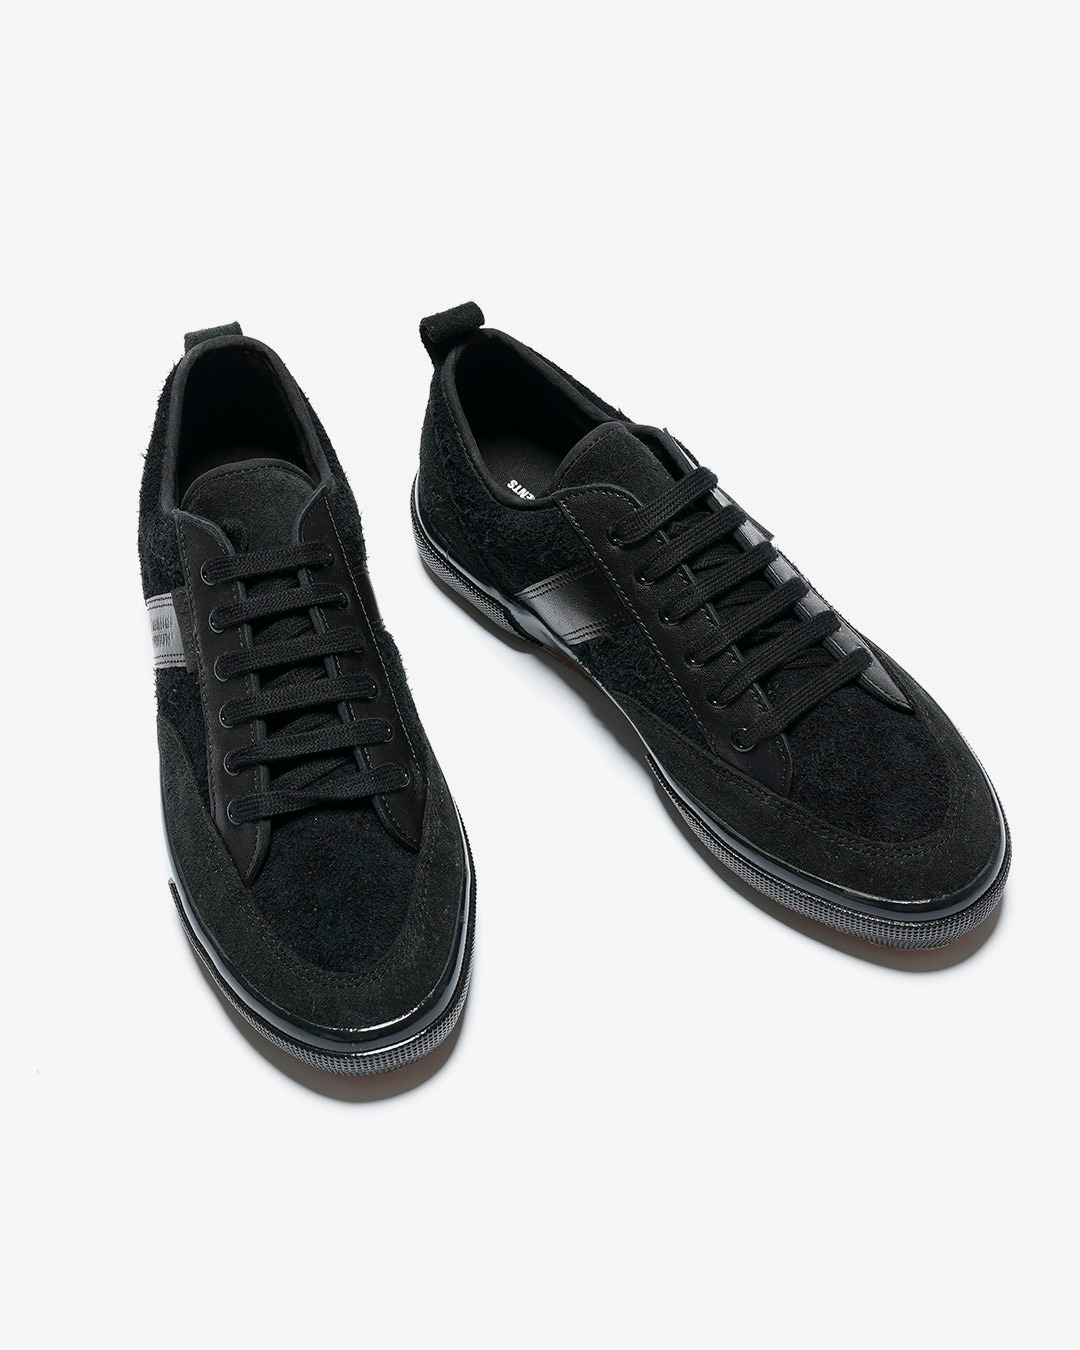 Engineered Garments & Superga Shoes Drop 3420 Mil Sneaker Collab